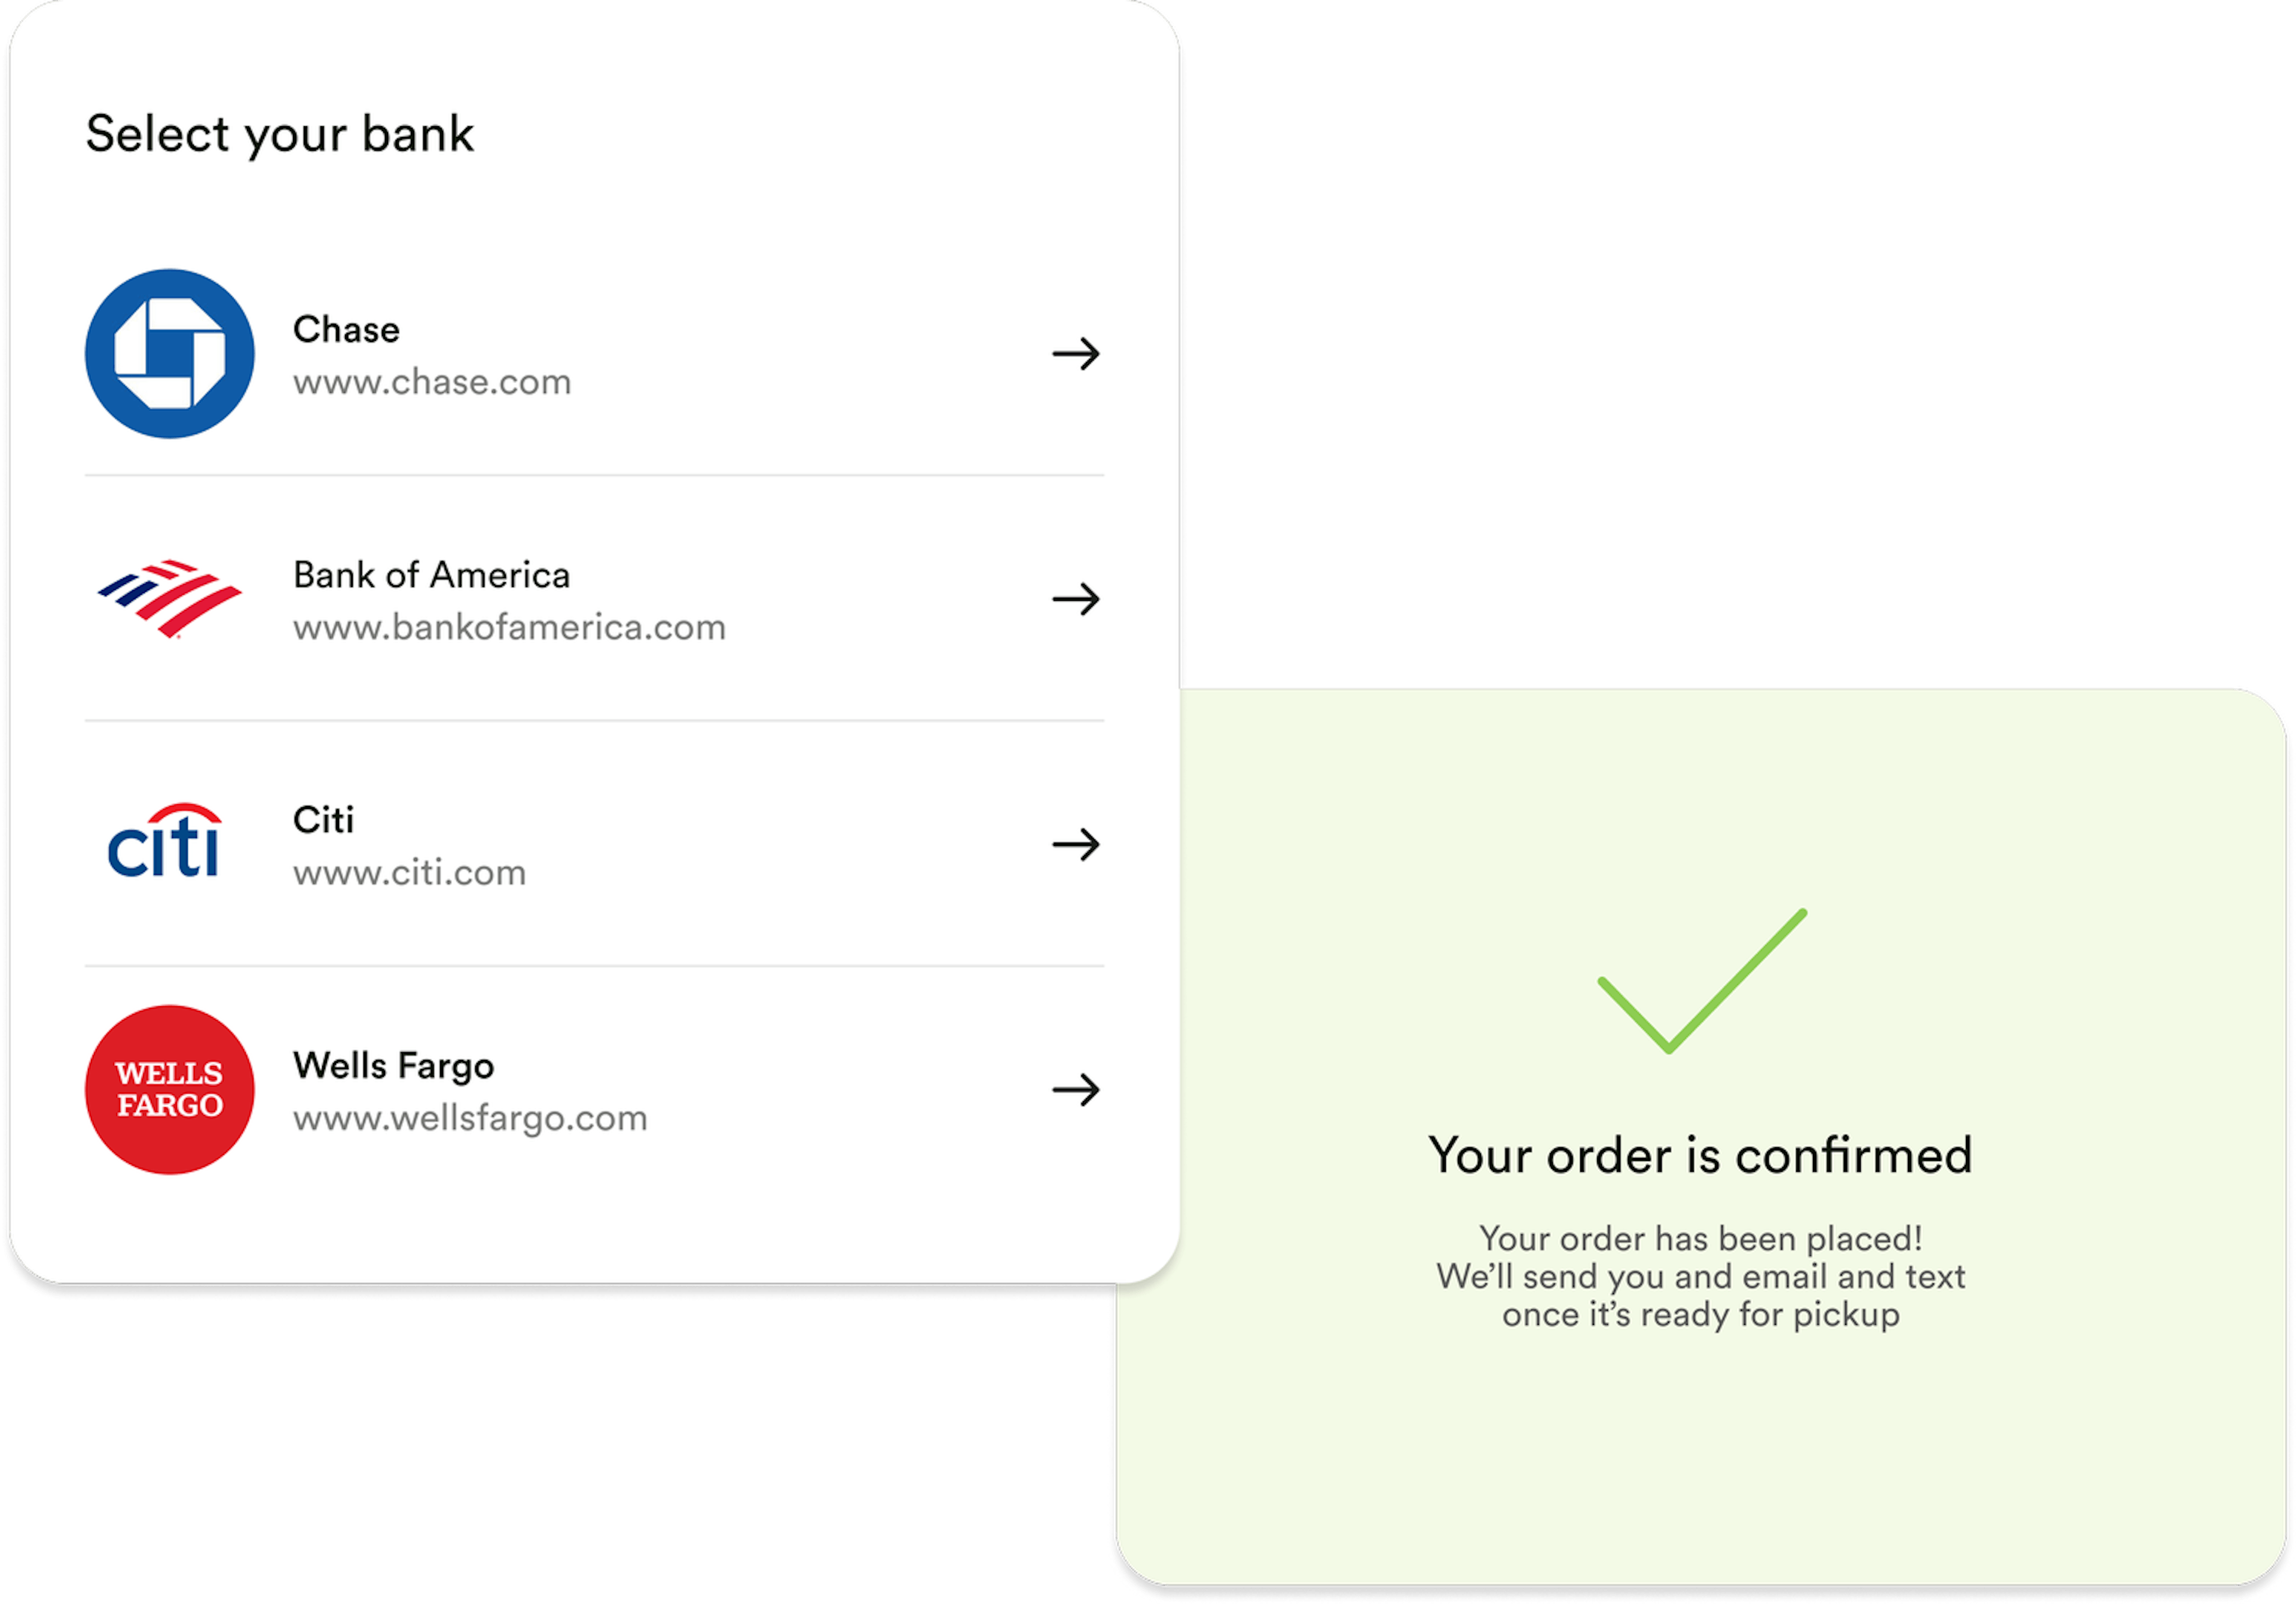 A screenshot illustration of ACH payments, listing popular banks and a confirmation message for a cannabis order made at a dispensary through ACH payments